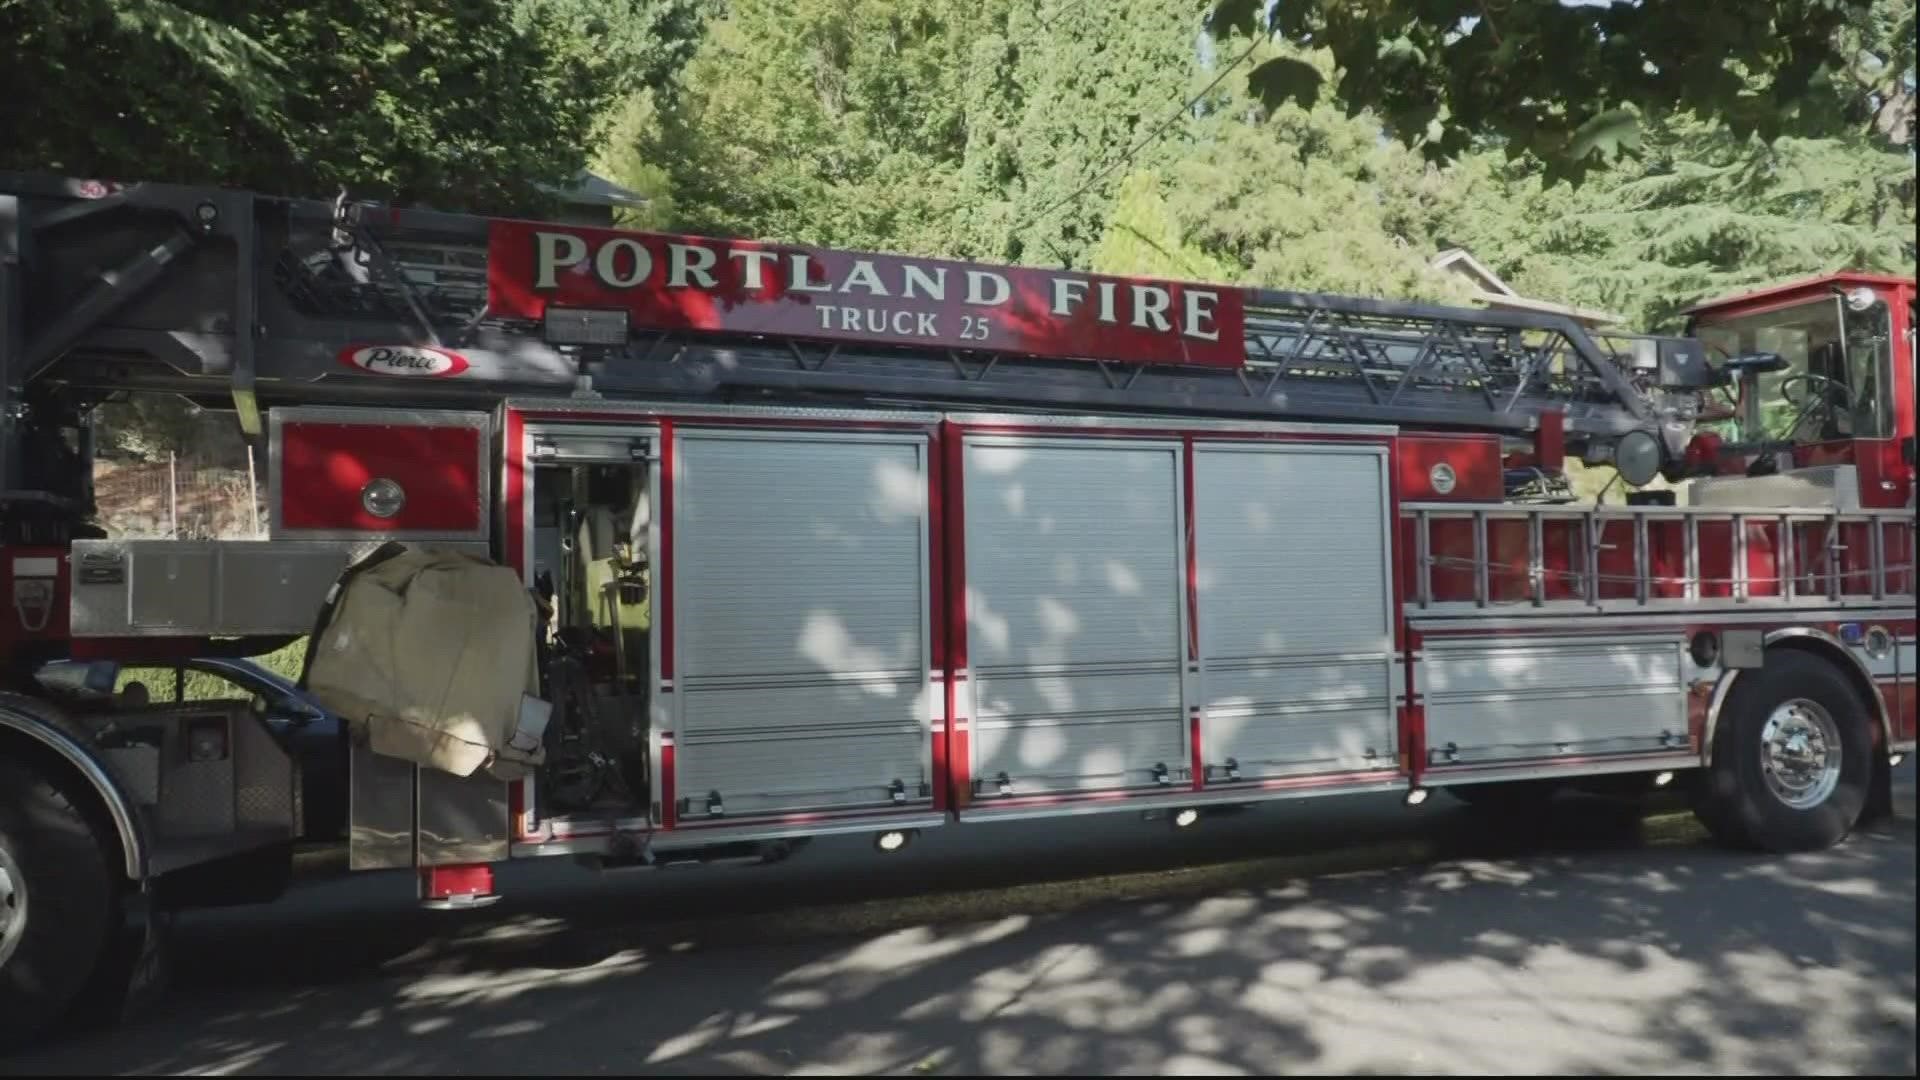 The Portland firefighter's union said due to staff shortages, the city is forcing firefighters to work mandatory overtime or face disciplinary action.